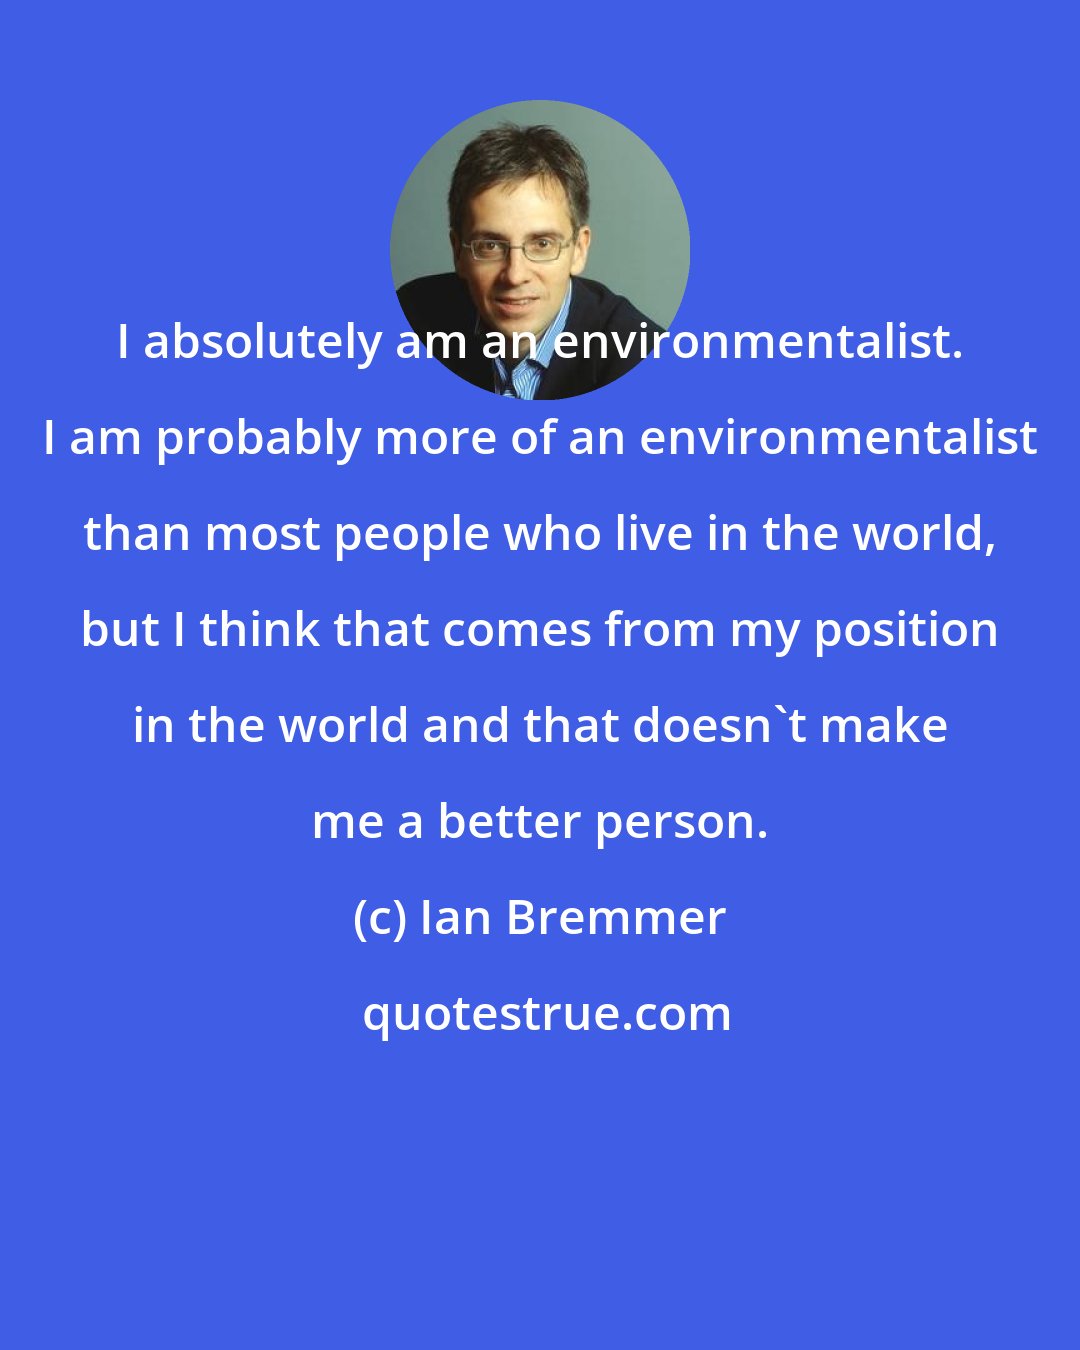 Ian Bremmer: I absolutely am an environmentalist. I am probably more of an environmentalist than most people who live in the world, but I think that comes from my position in the world and that doesn't make me a better person.